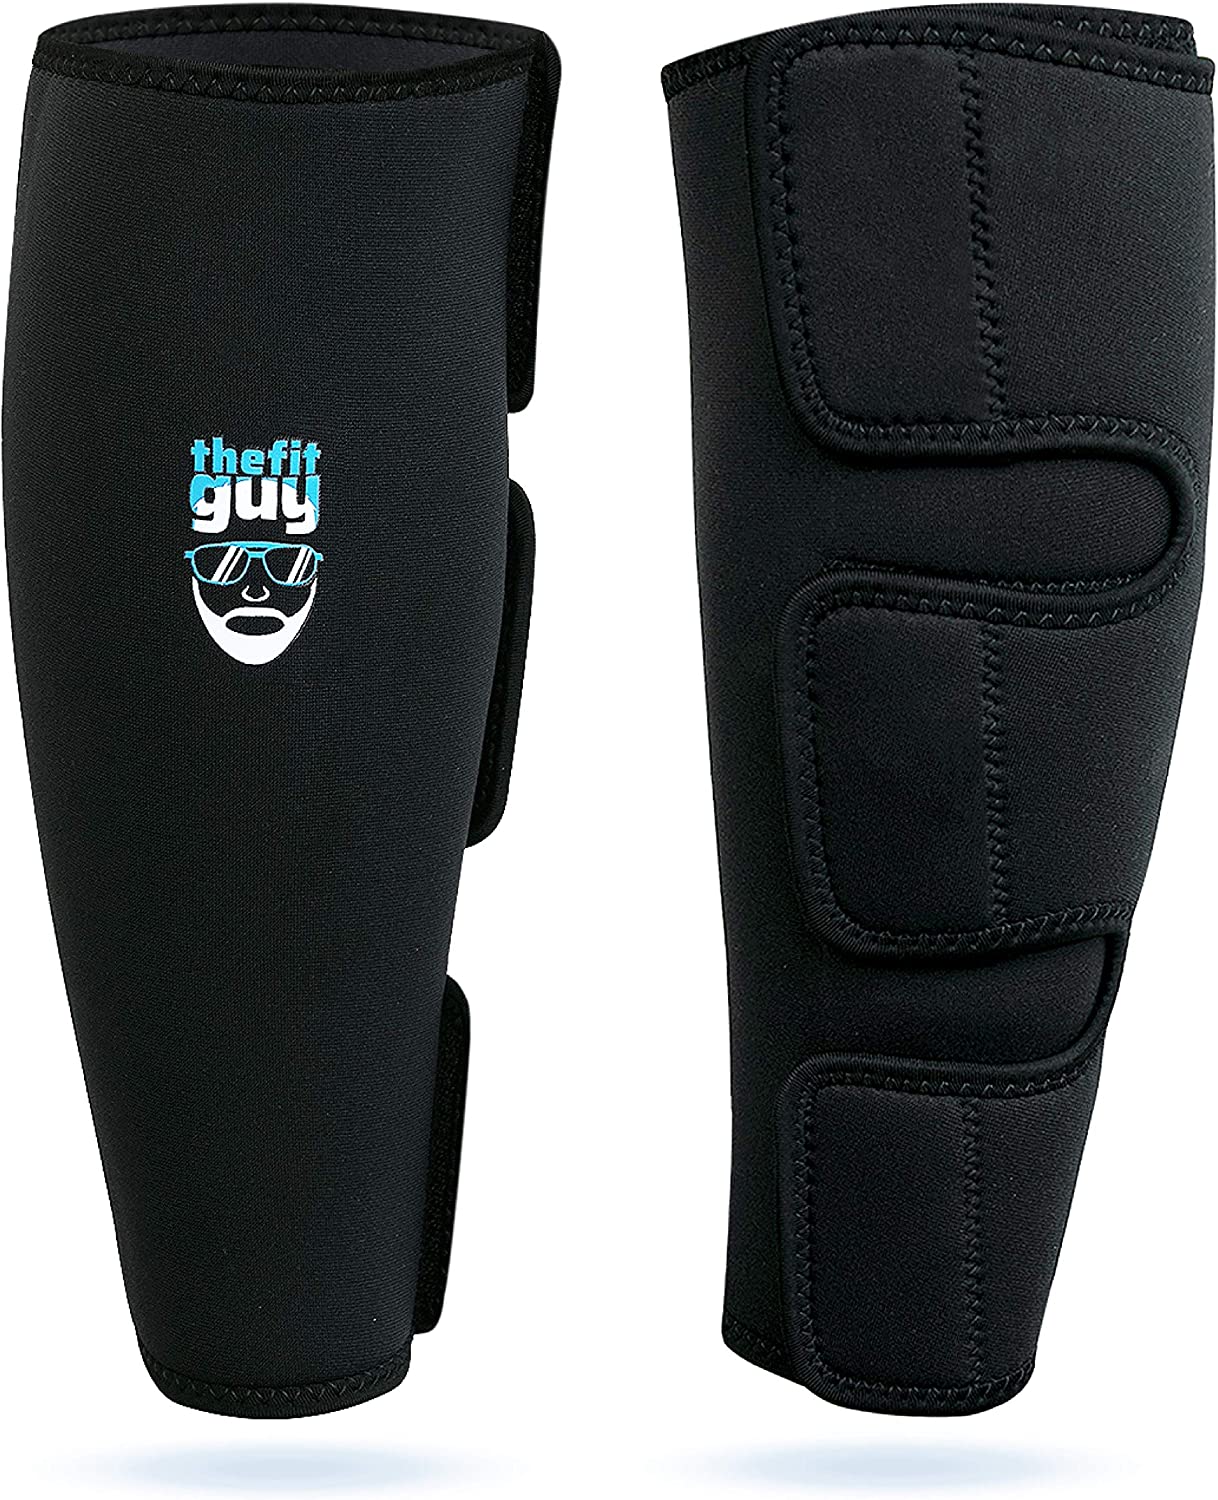 The Fit Guy shin guards